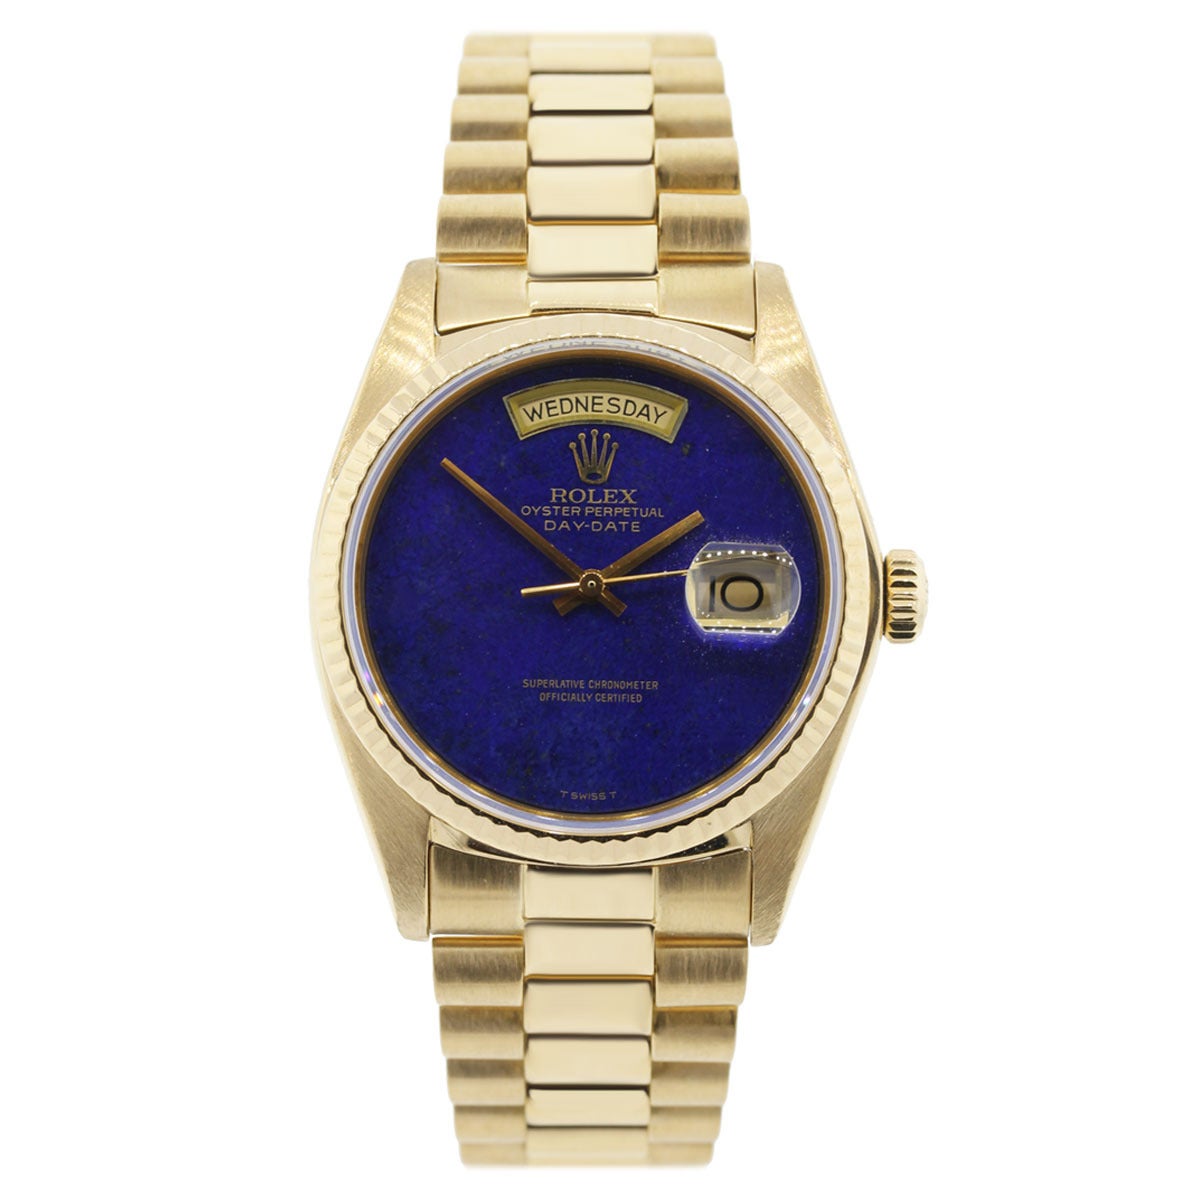 Company: Rolex
Model: Day-Date
Ref.: 18038
Serial: 7 mill
Case Material: 18k Yellow Gold
Movement: Automatic
Case Diameter: 36 mm
Bezel: 18k Yellow Gold fluted bezel
Bracelet: 18k Yellow Gold presidential band
Dial: Blue Lapis